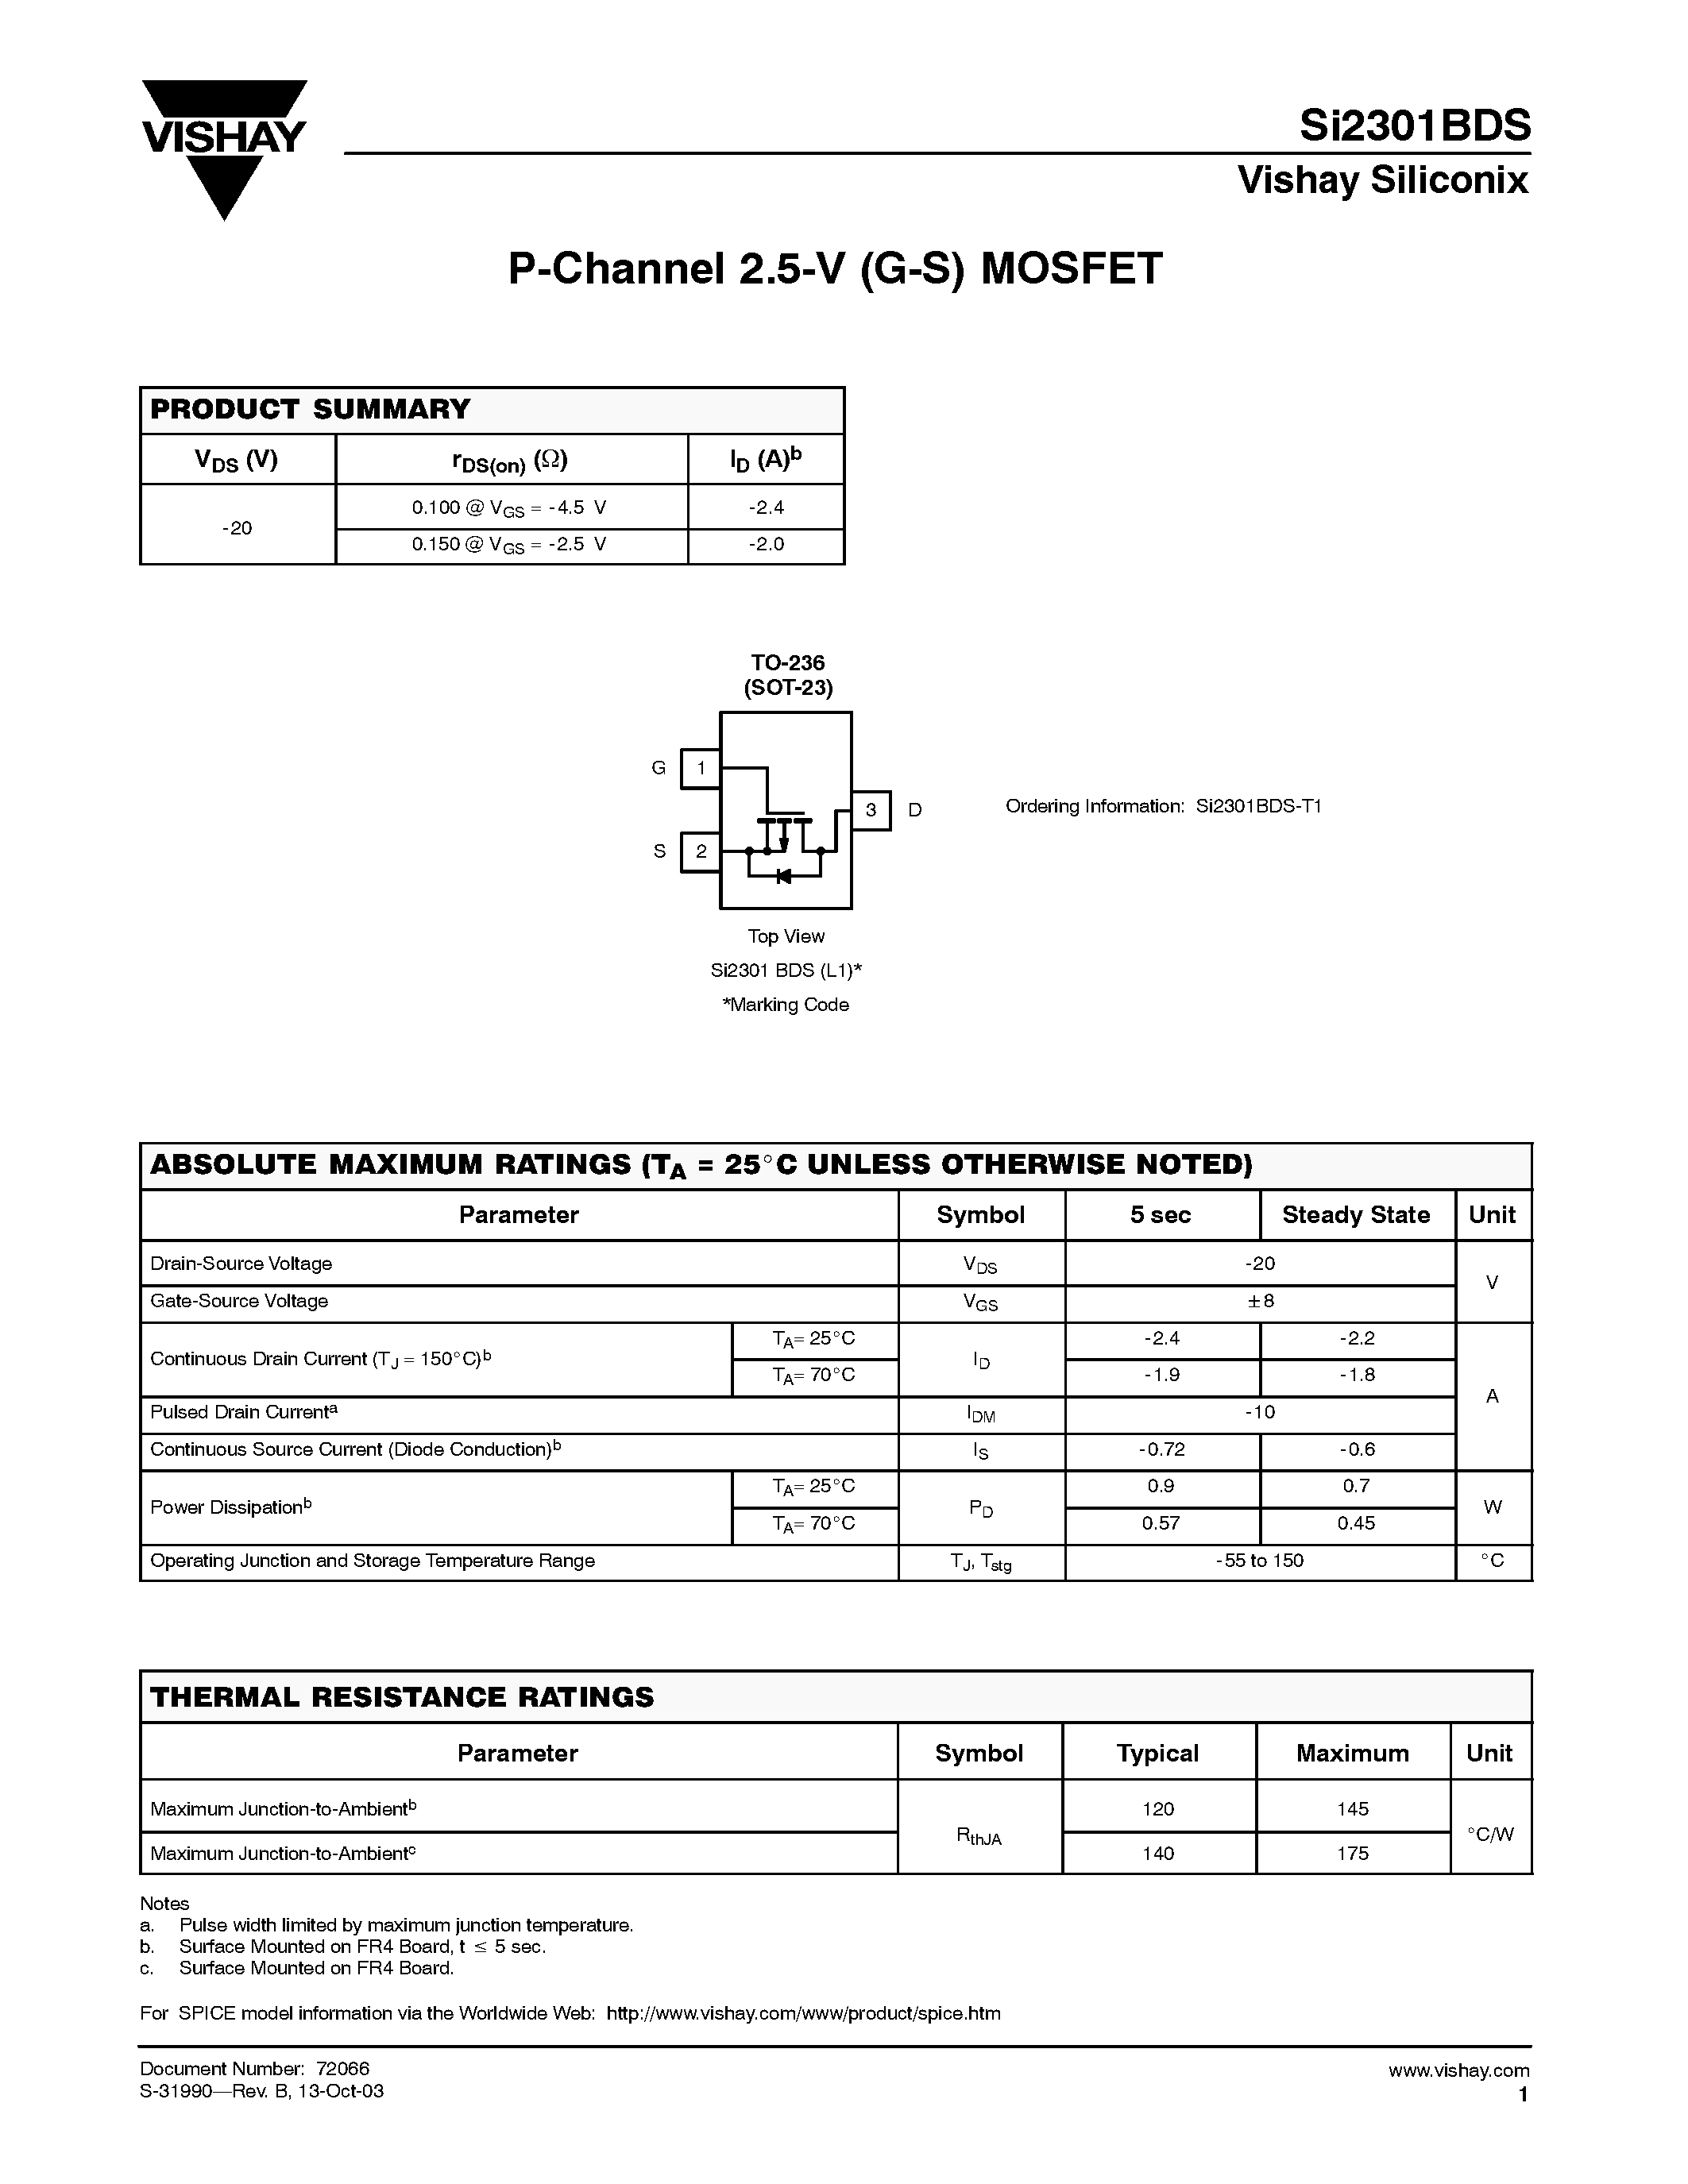 Datasheet Si2301BDS-T1 - P-Channel 2.5-V (G-S) MOSFET page 1